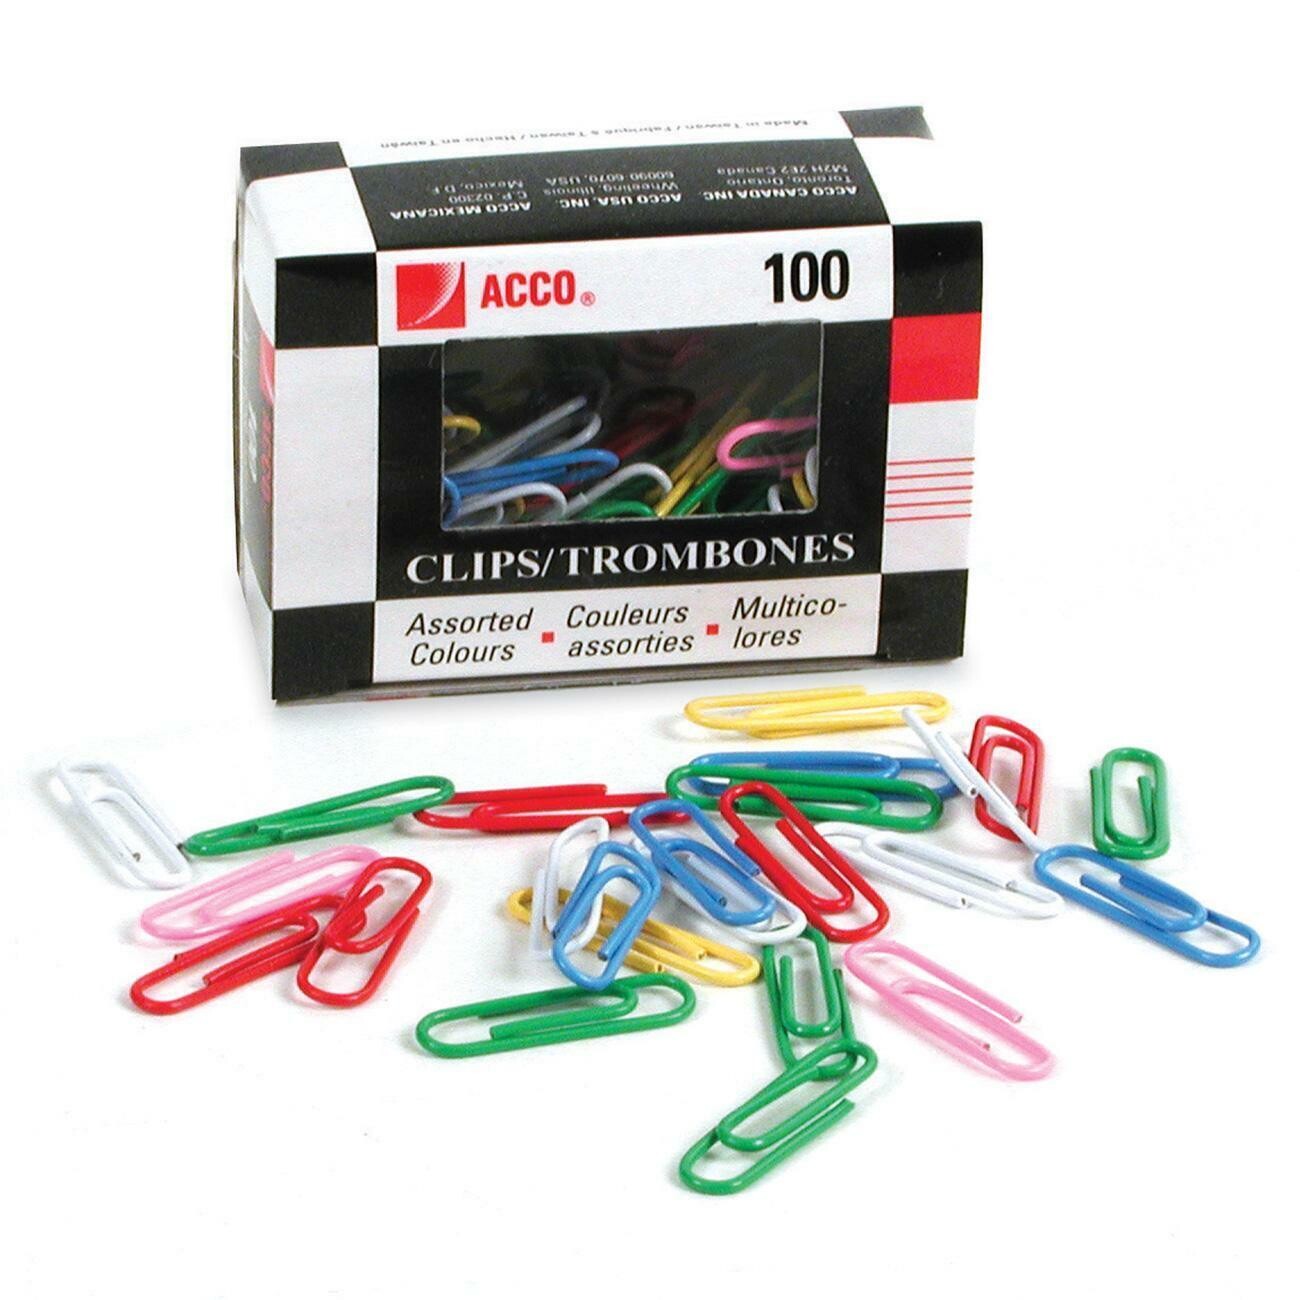 Paper Clips, #1 100 Pack, Acco